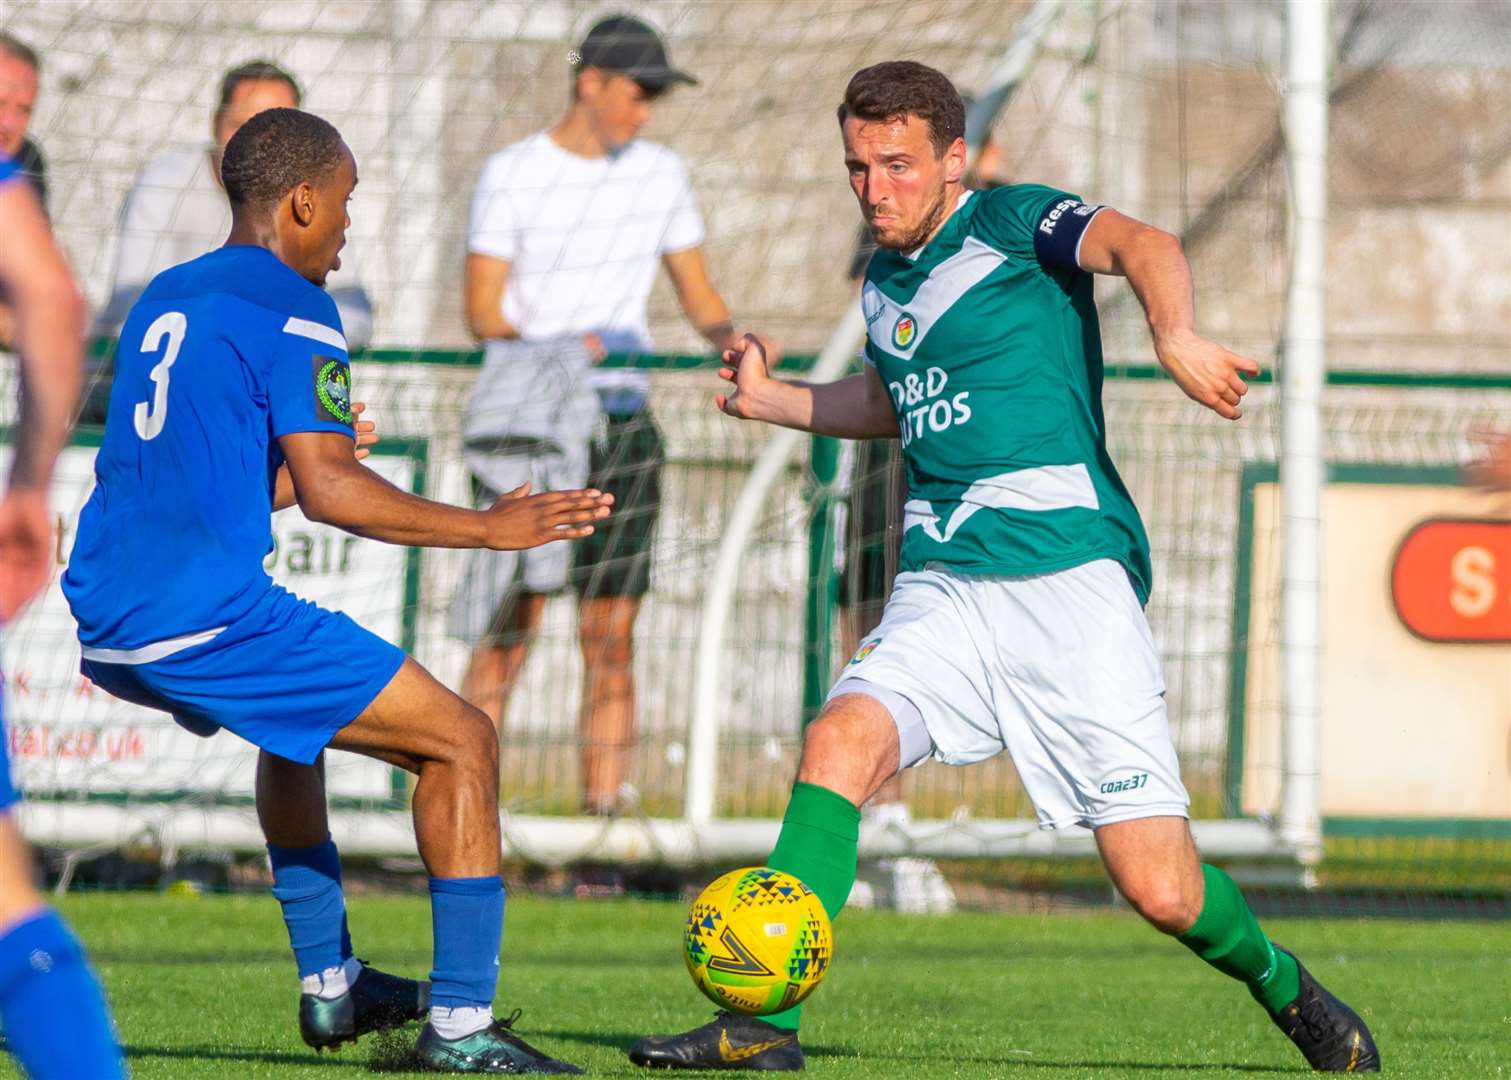 Ashford United in FA Trophy action last season against Chalfont St Peter. Pictures Ian Scammell